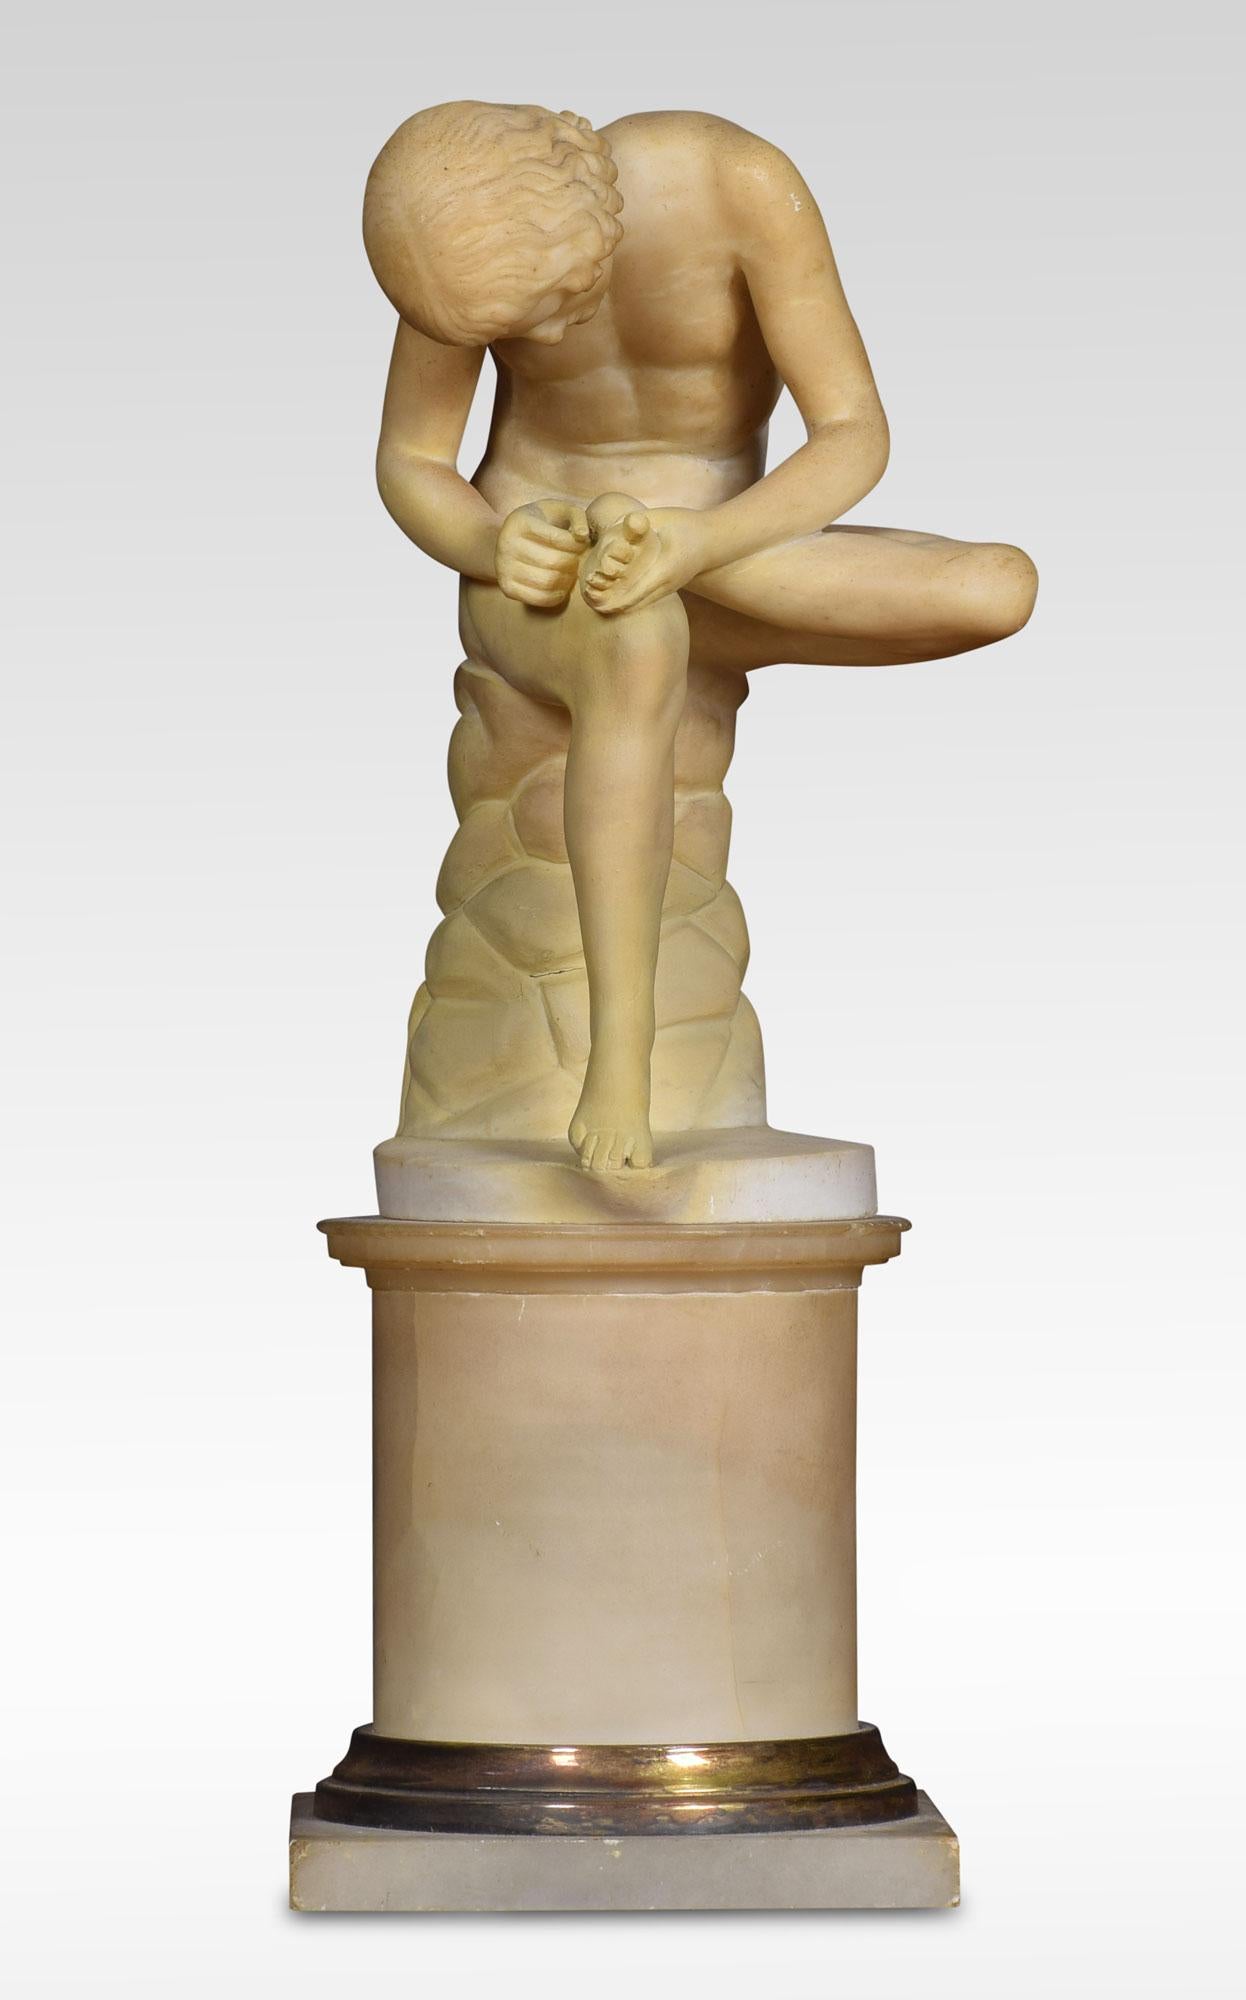 Alabaster sculpture, Spinario statue of a boy with a thorn in his foot on a yellow Scagliola pedestal. He is based on an antique bronze original which is in the Capitoline Museum Rome.
Measures: Height 14.5 inches
Length 5.5 inches
Width 5.5